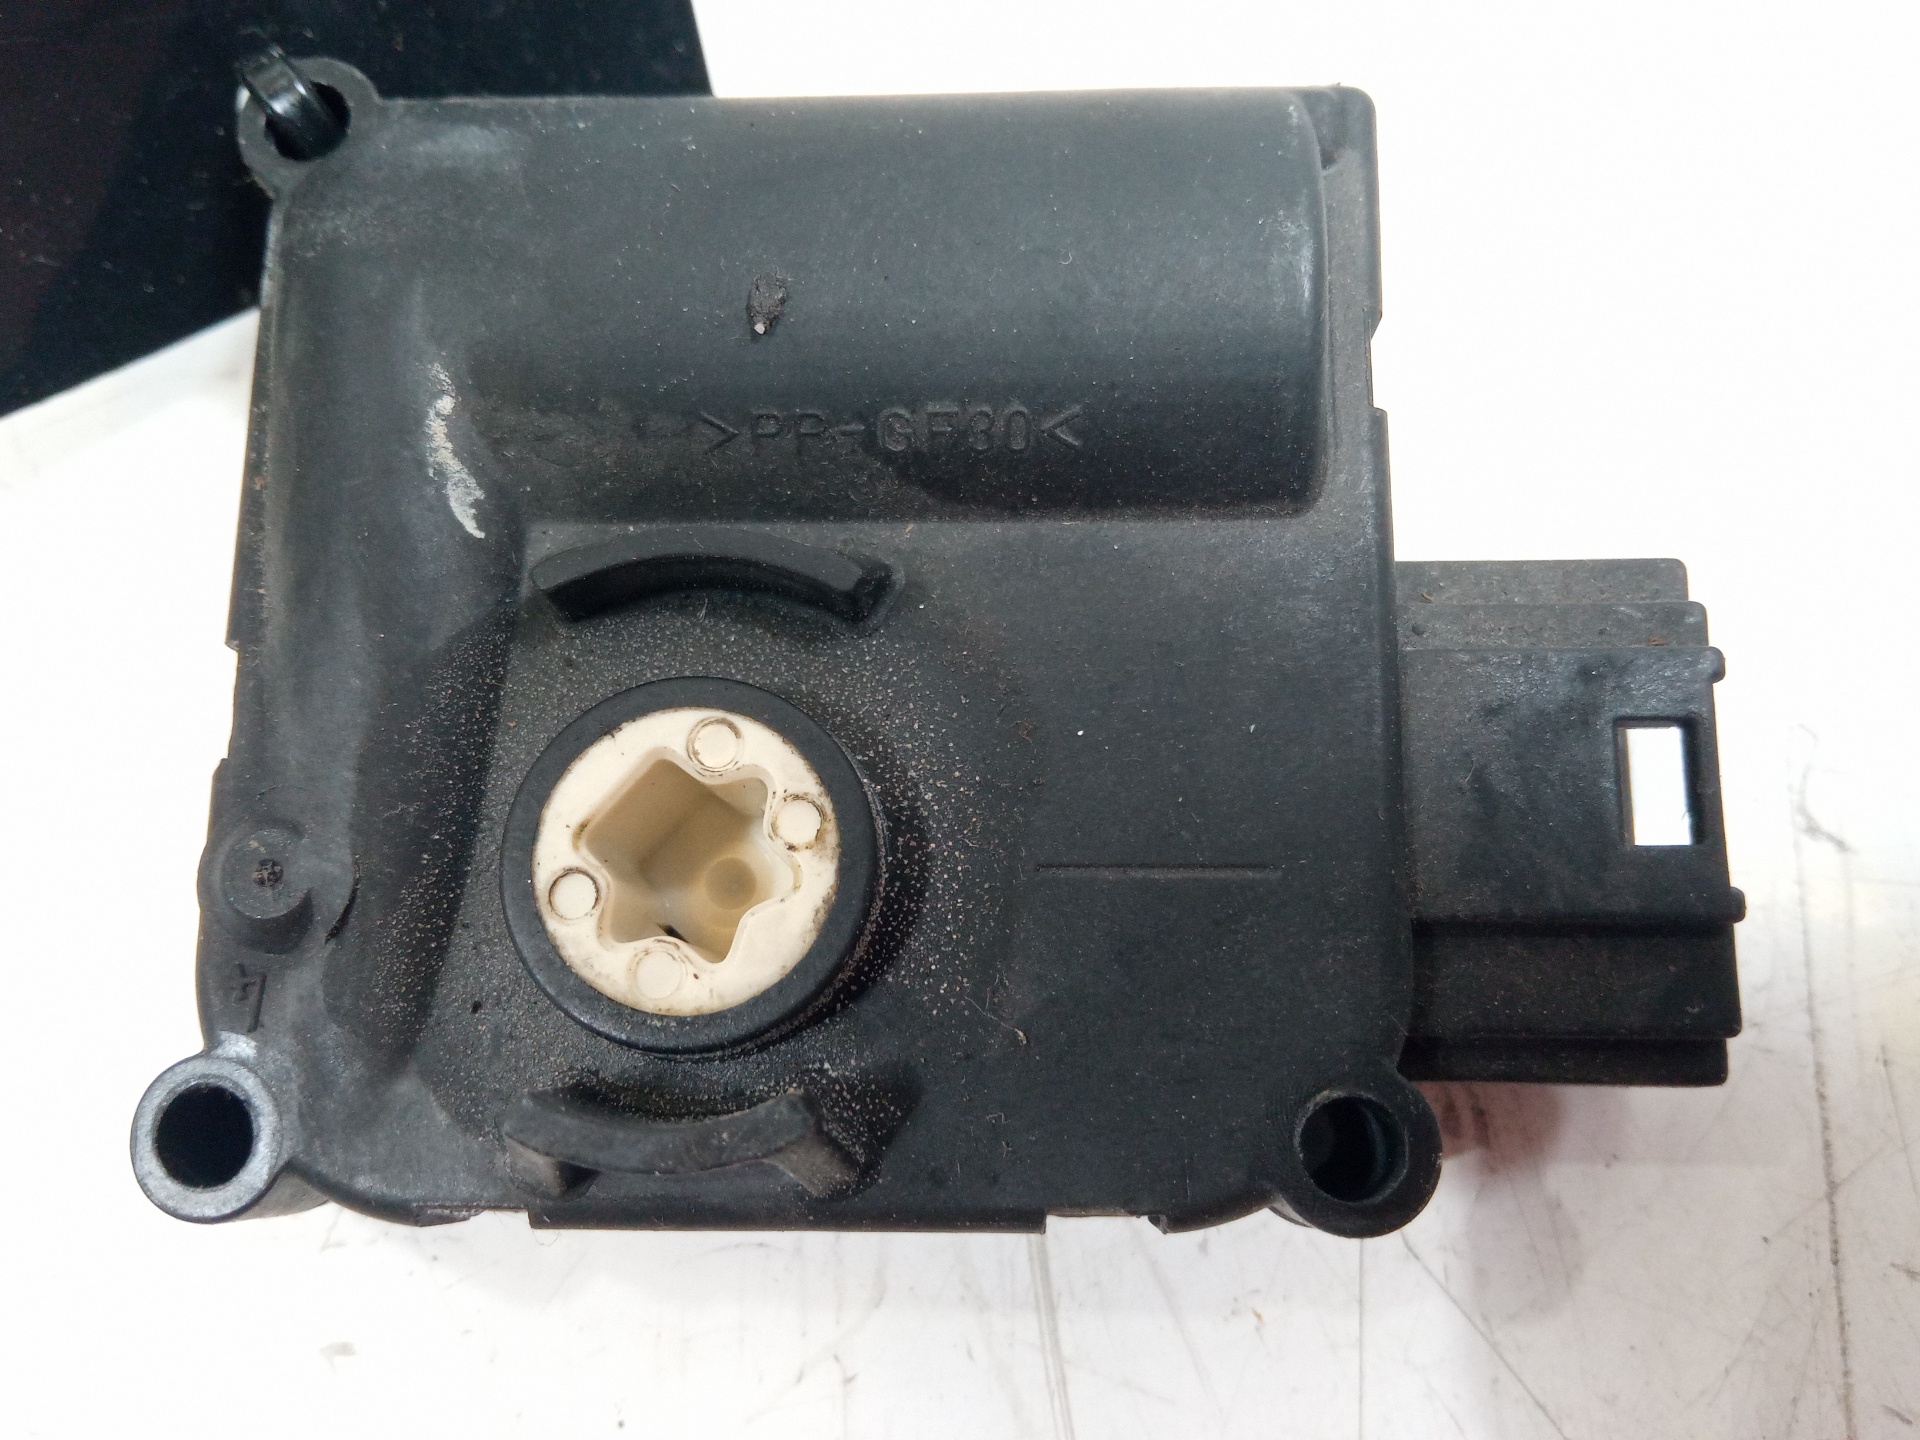 AUDI A6 C6/4F (2004-2011) Air Conditioner Air Flow Valve Motor 4F0820511A, 5PINES 24959036